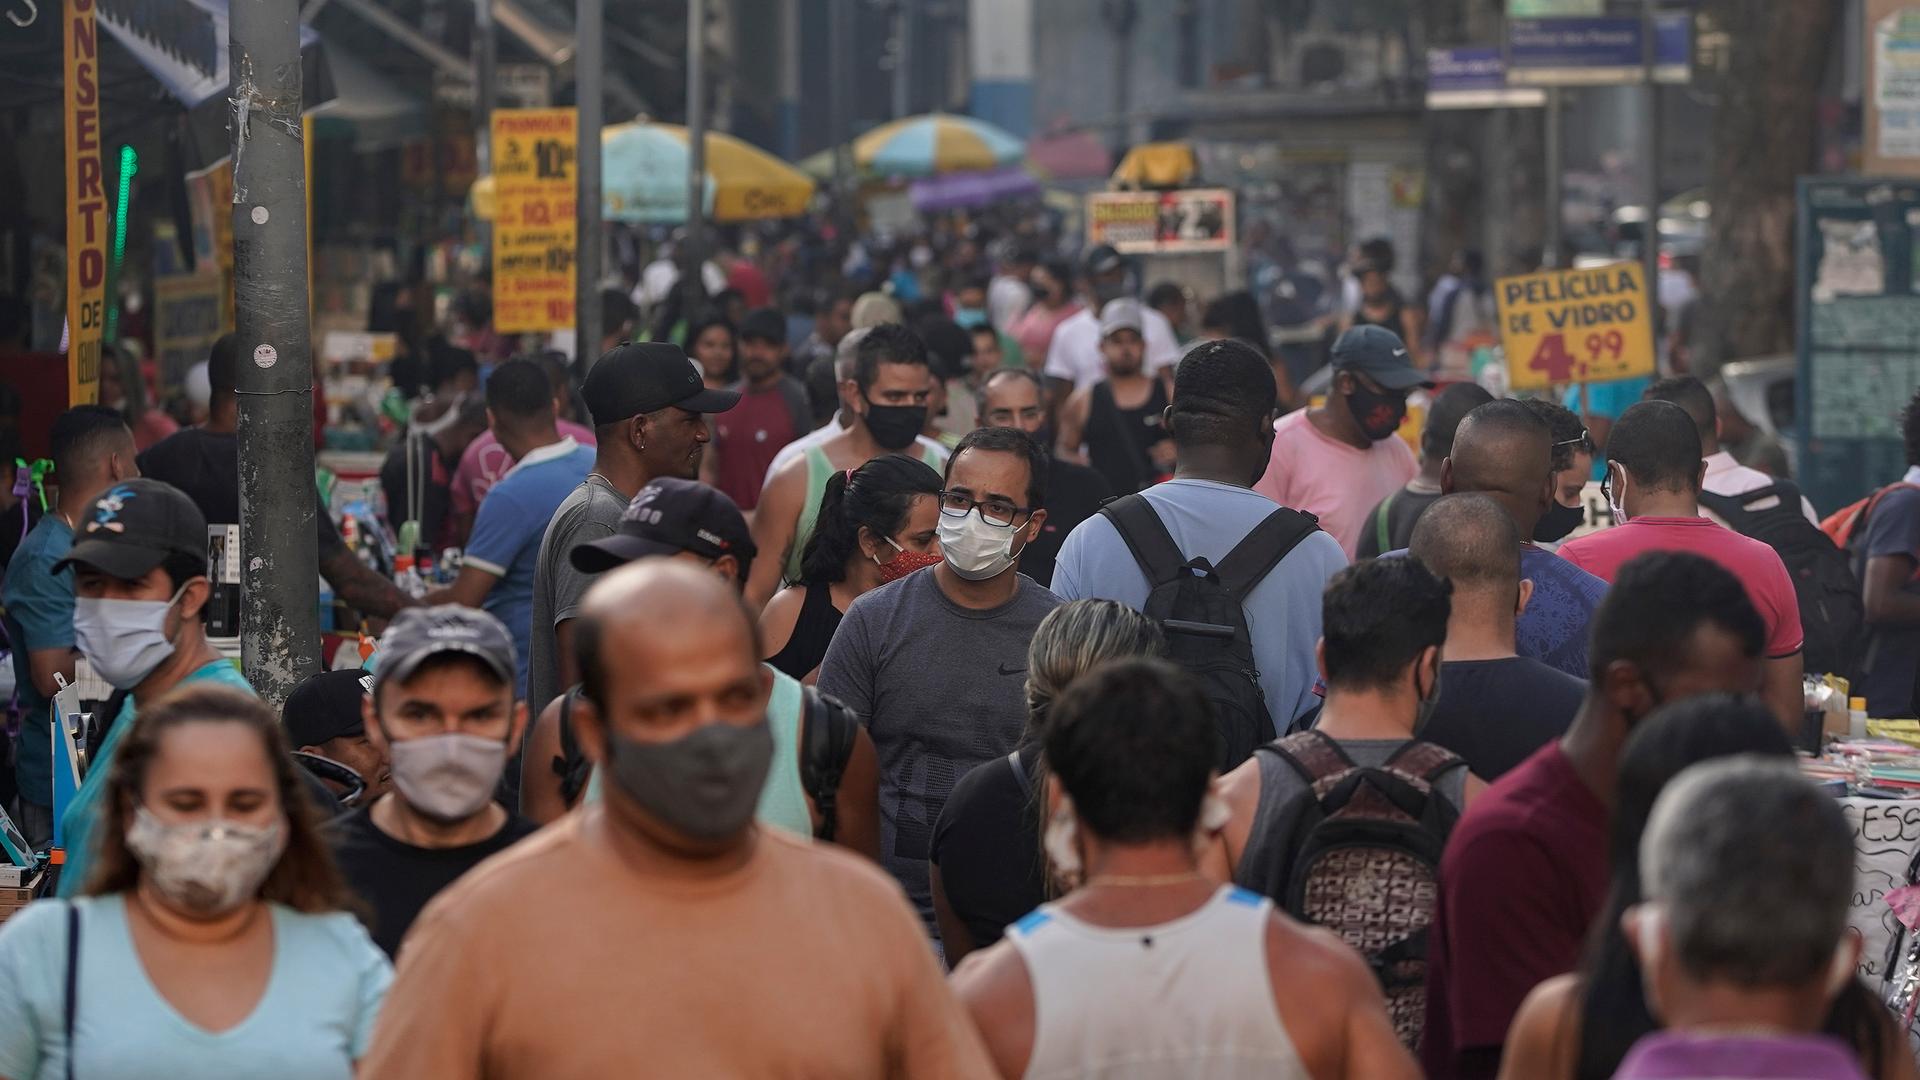 A crowded street is shown with some people wearing face masks.